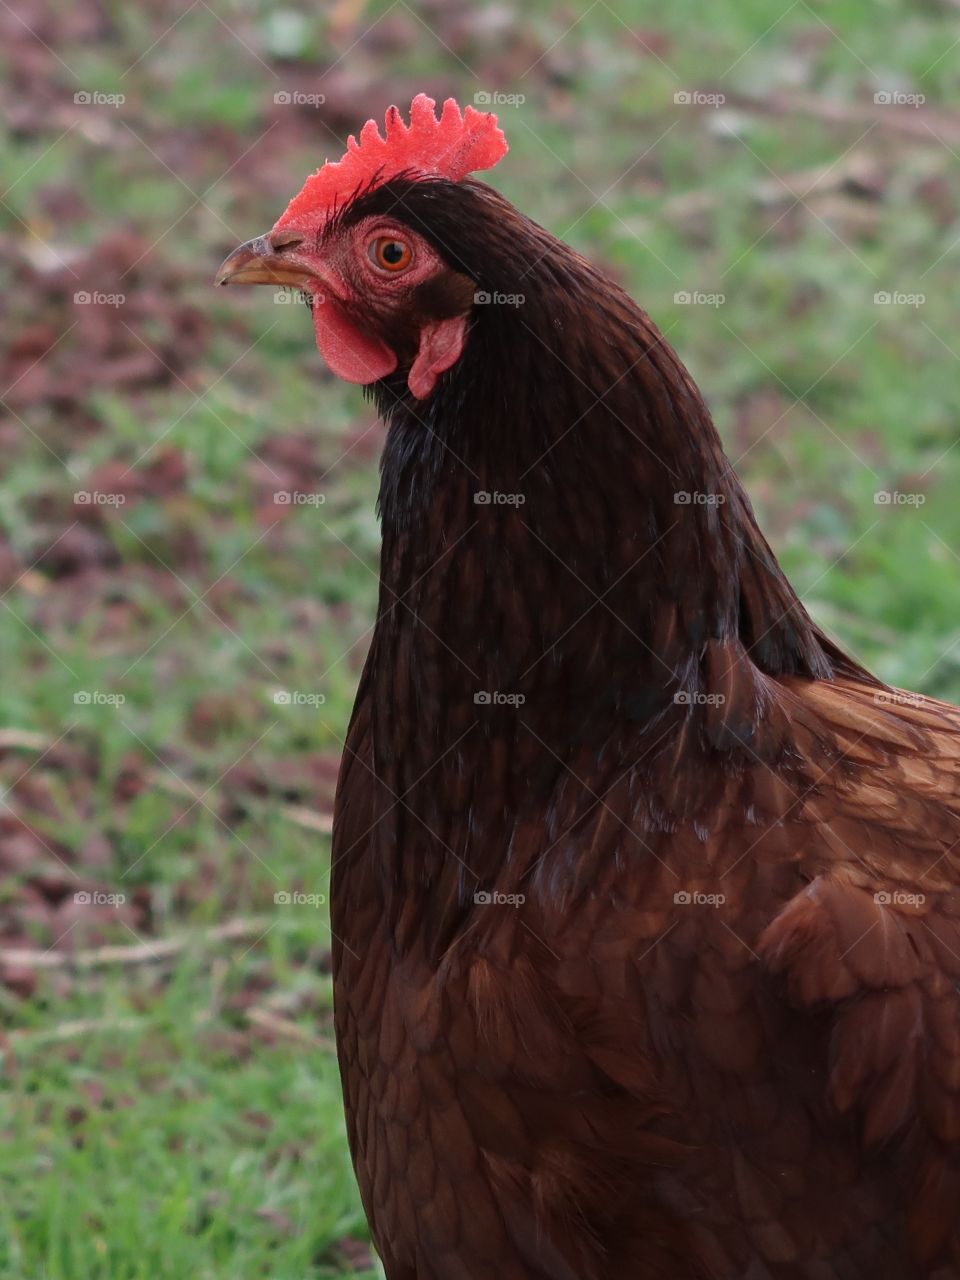 A brown rooster with red parts searches for feed in the farmyard full of fresh spring grass. 